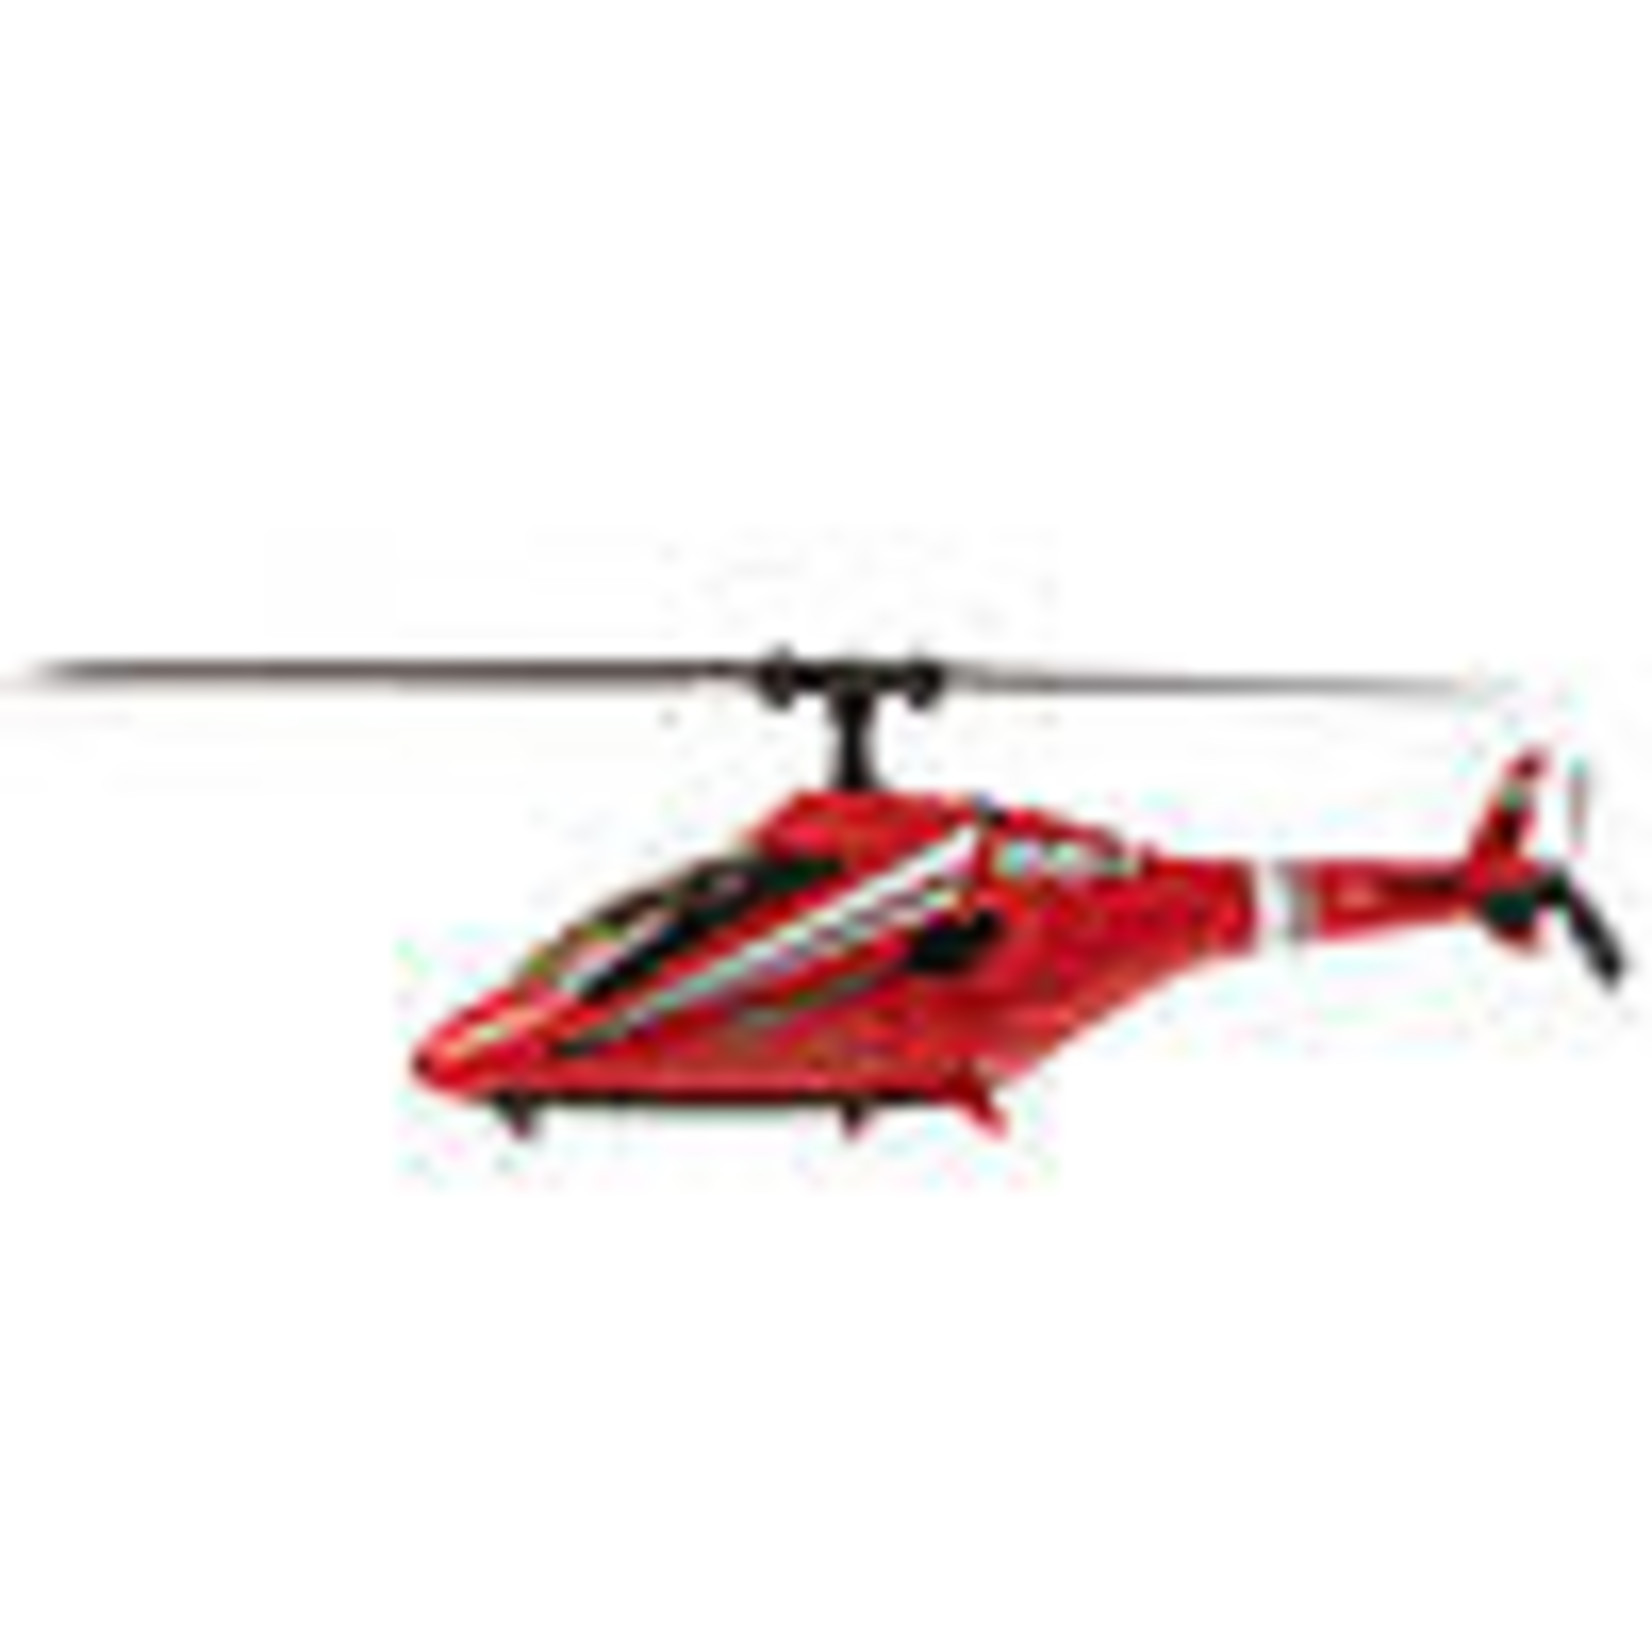 Blade BLH4400  BLADE 150 FX RTF Helicopter